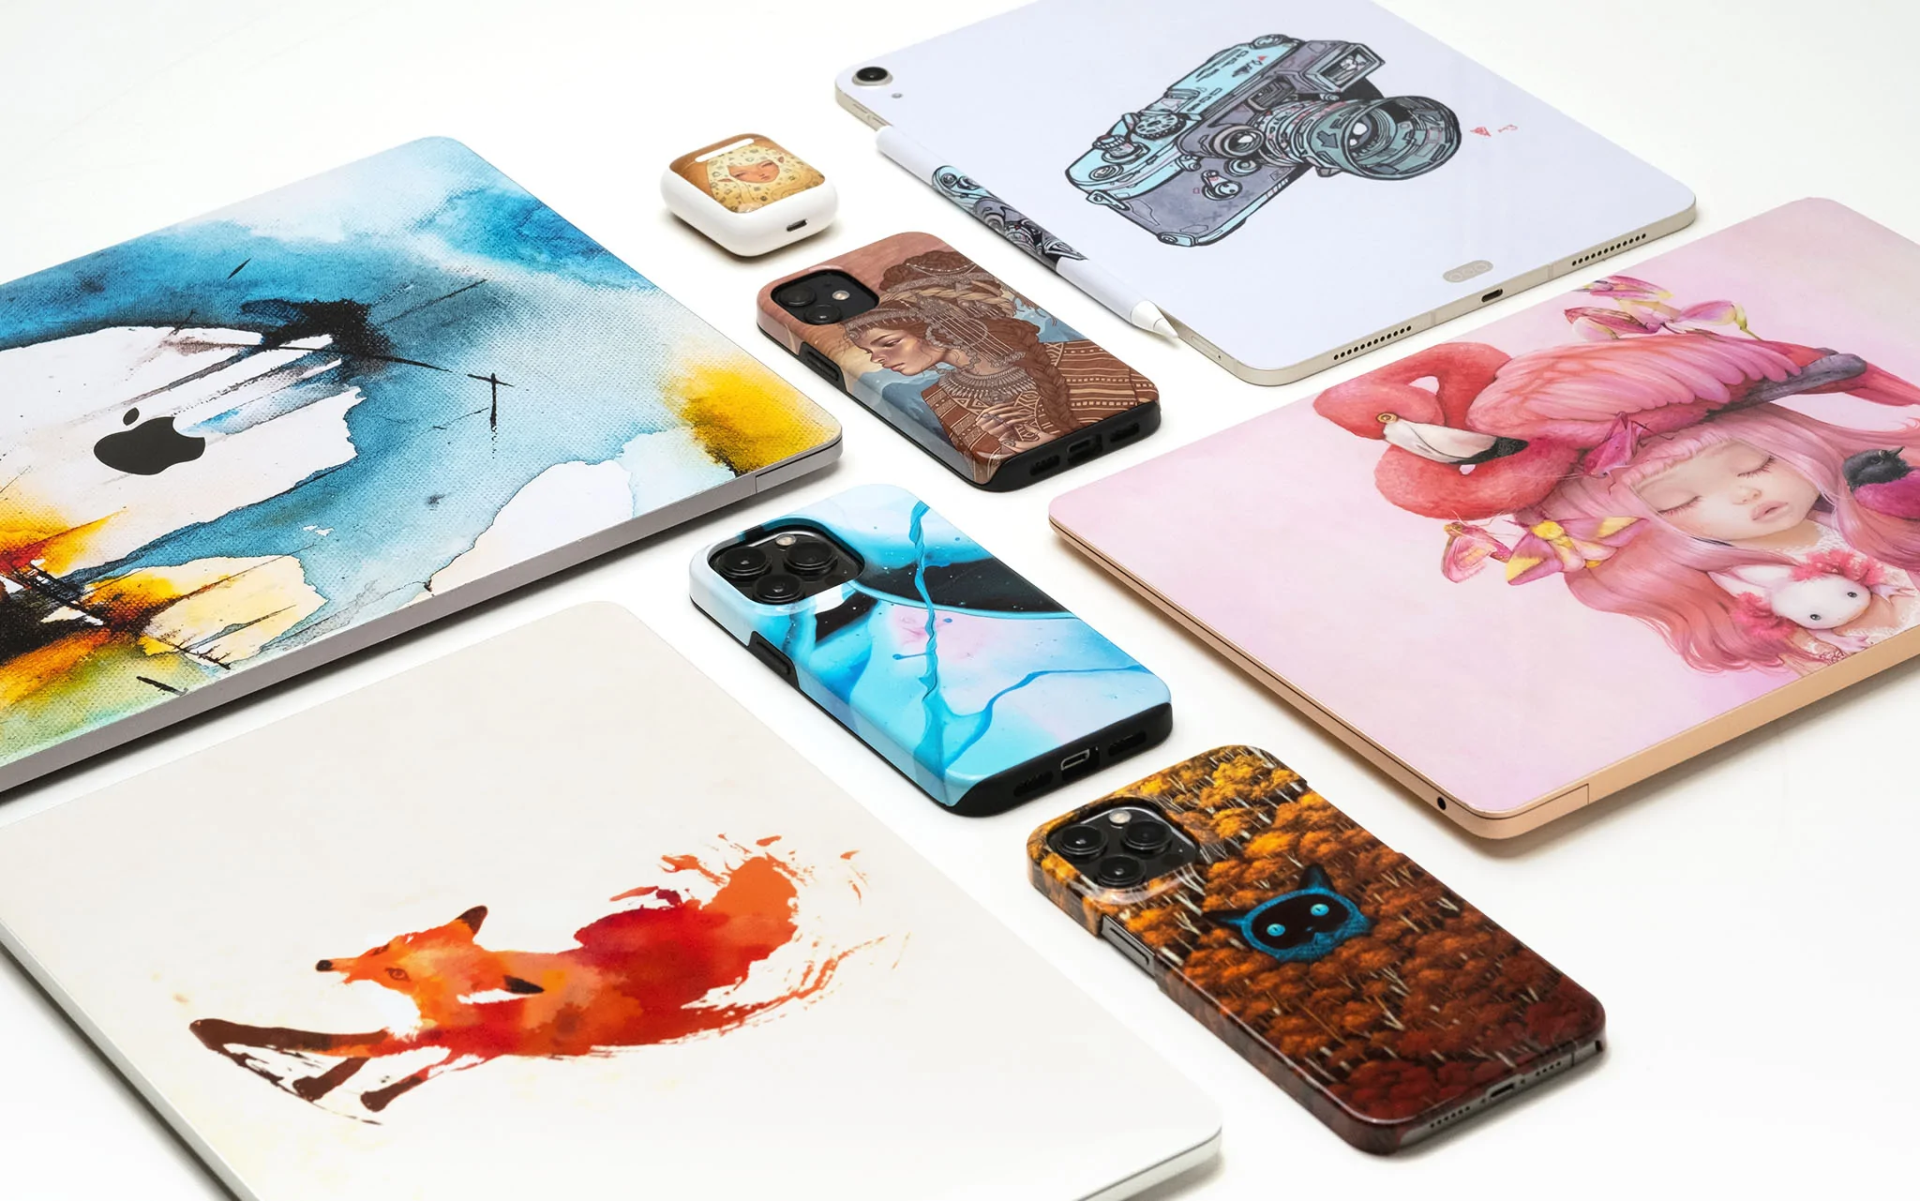 Teachers and students get a 25% discount from MightySkins on custom protective skins for cellphones, laptops, devices and gadgets.